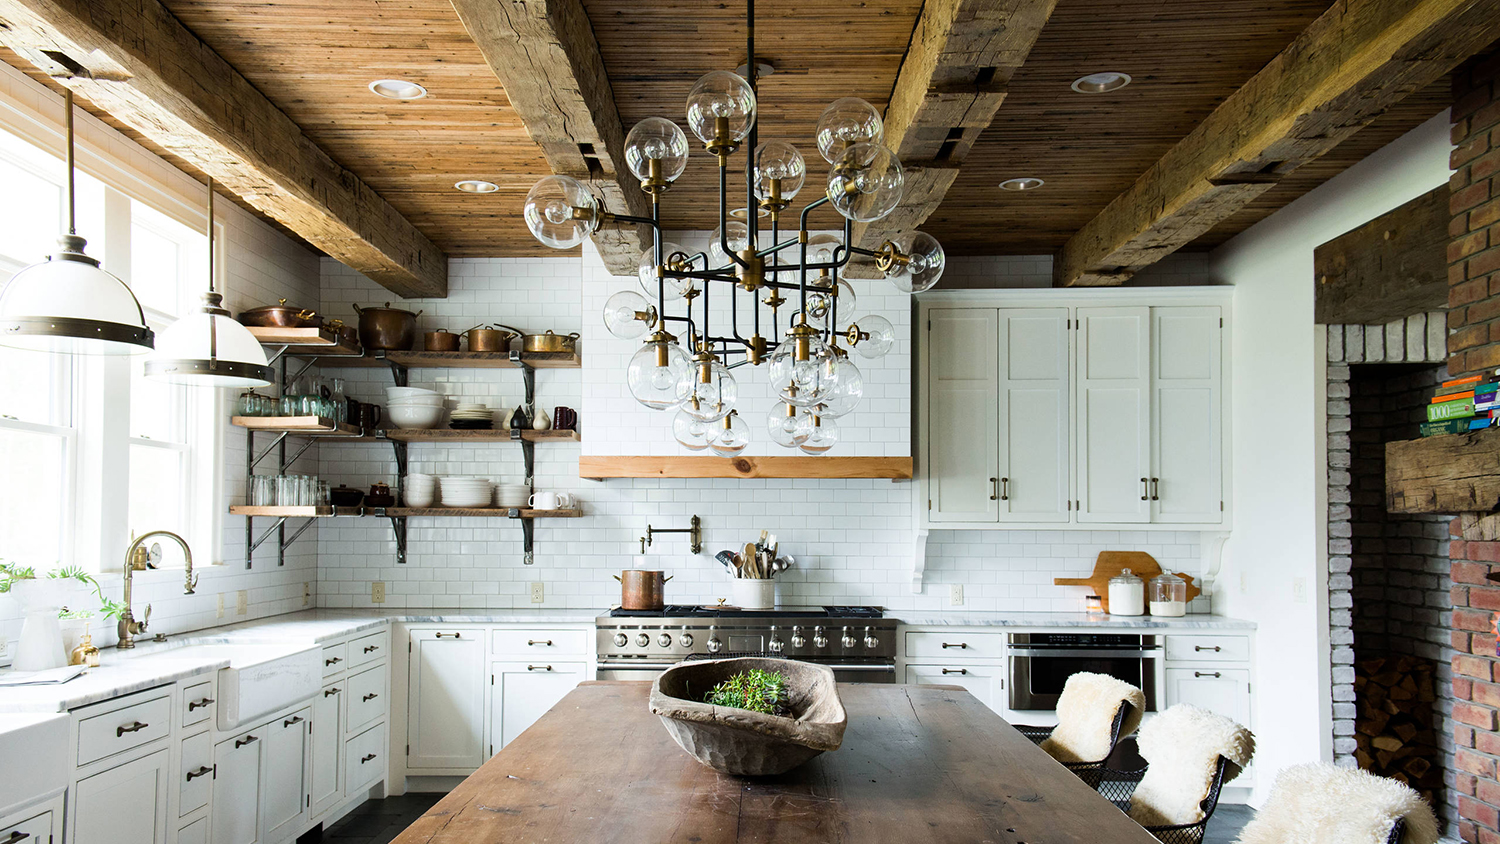 Modern farmhouse kitchen ideas – how to achieve a country look ...